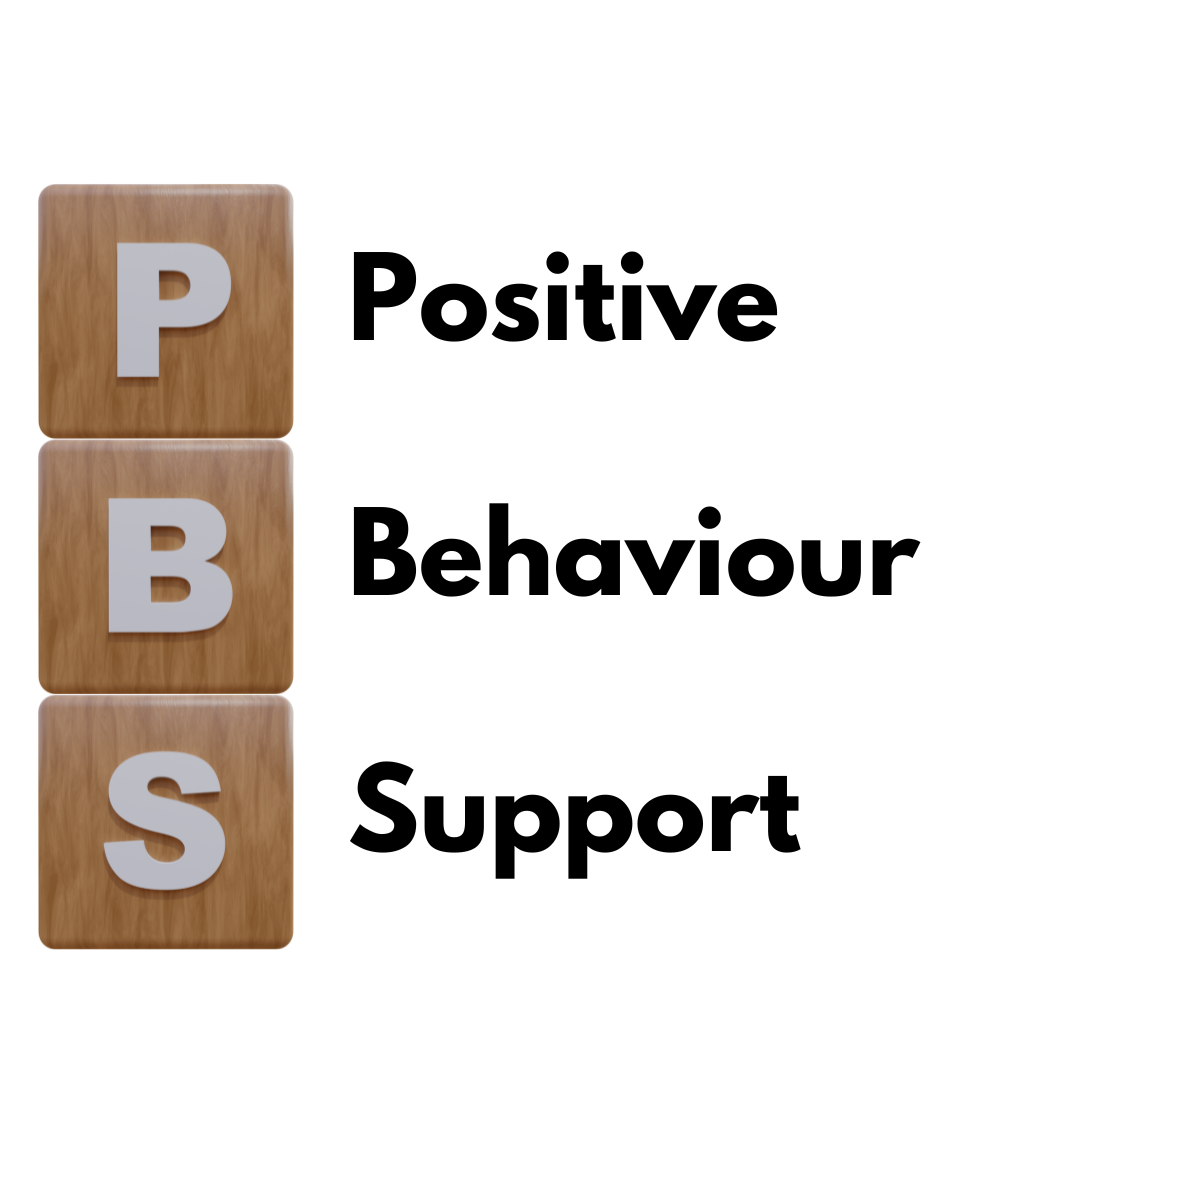 Three wooden blocks with the letters p, b, s on each and the words 